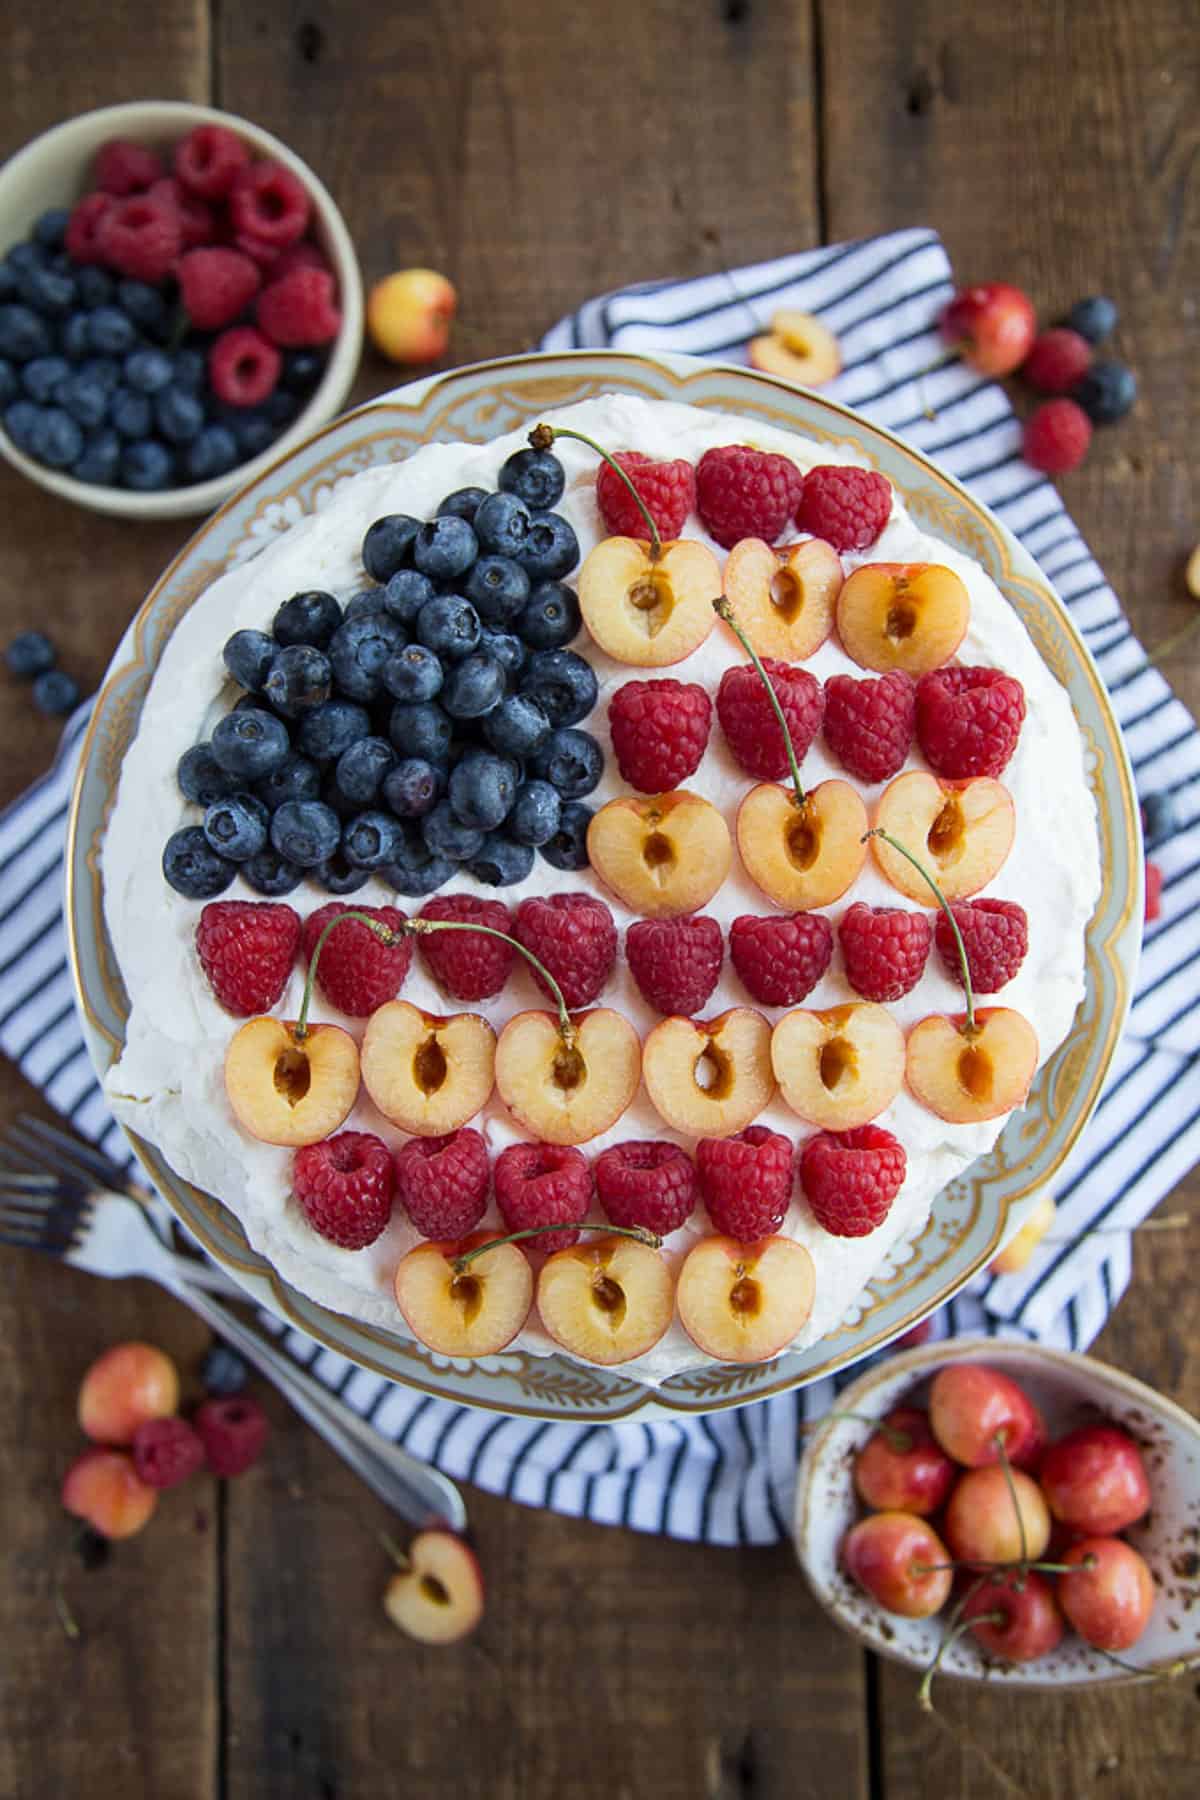 pavlova topped with berries and cherries in an american flag design.